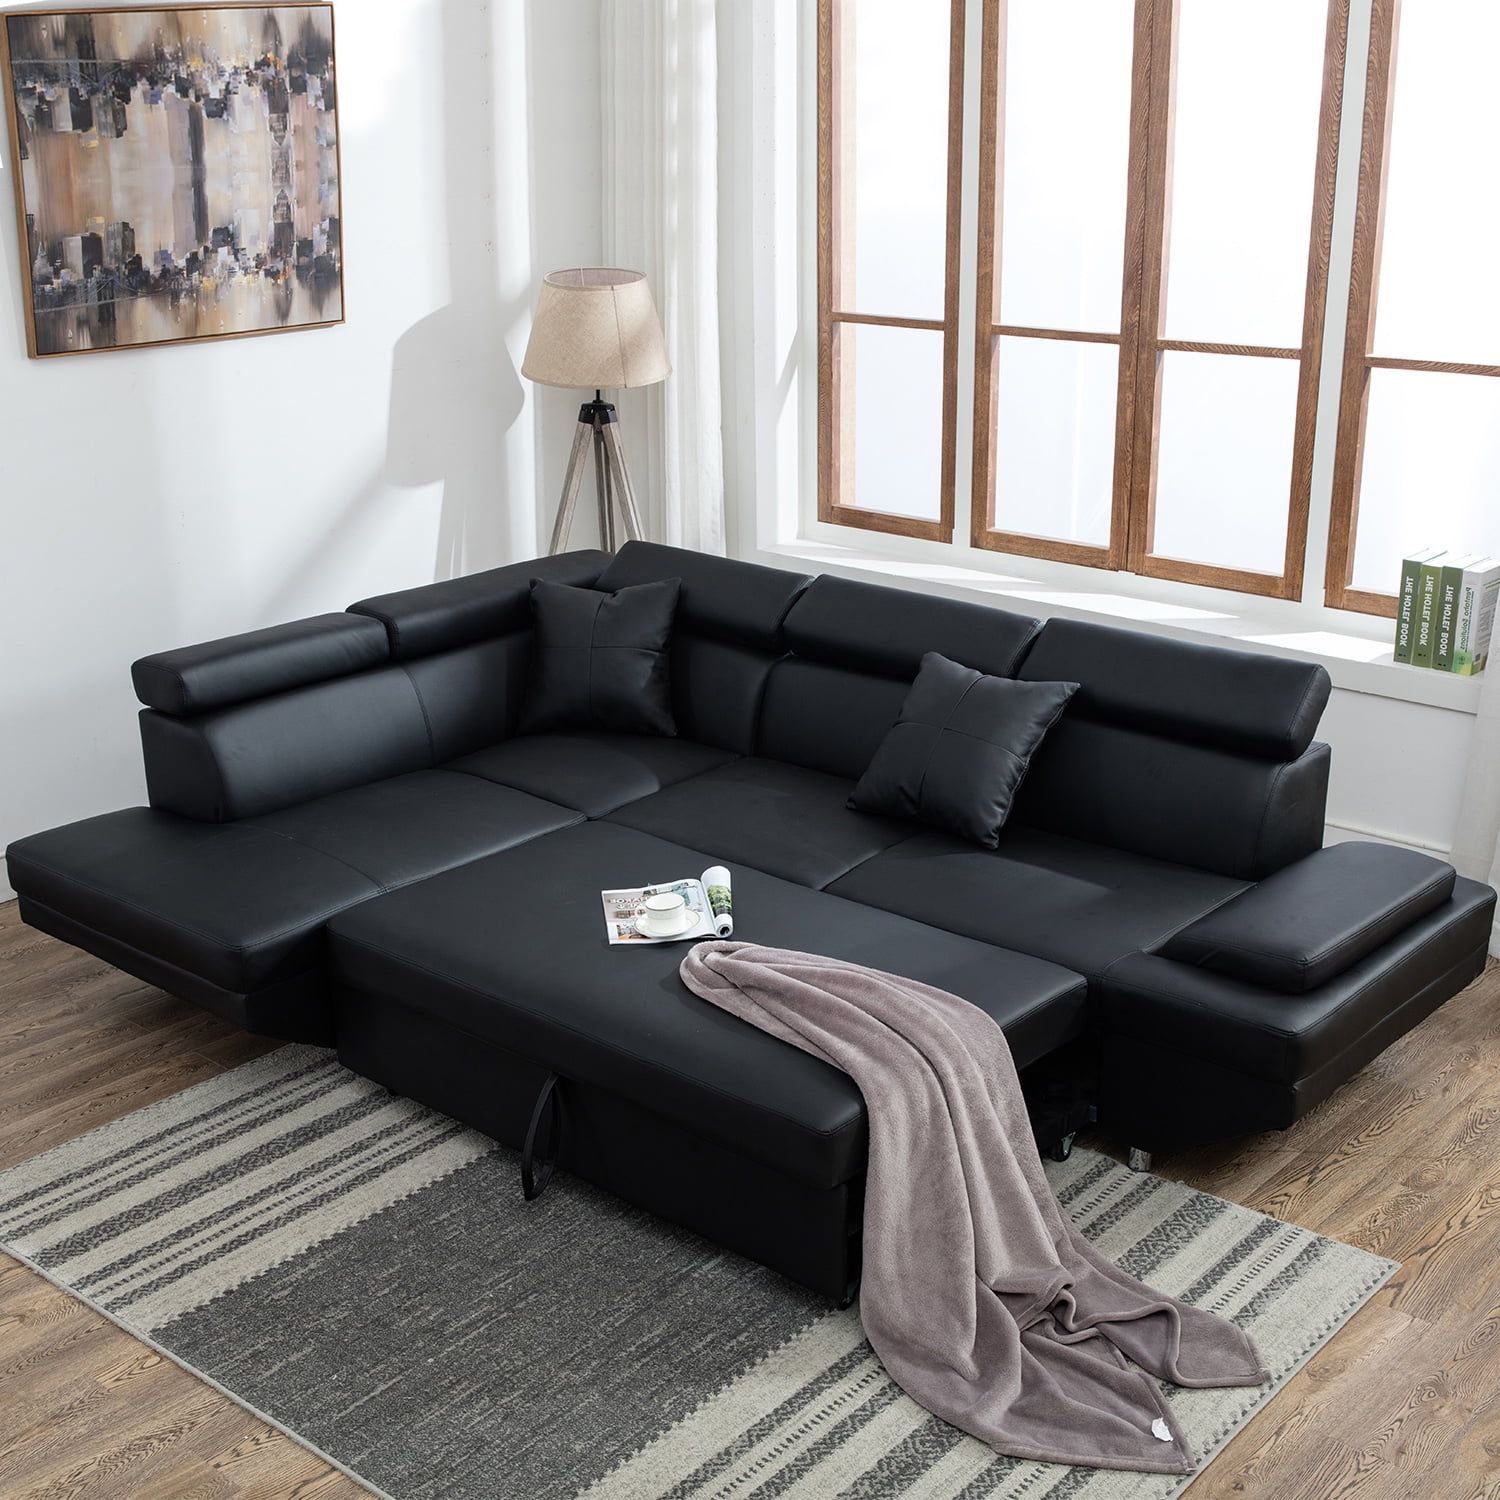 Featured Photo of 20 Best Collection of 3 Seat L Shaped Sofas in Black